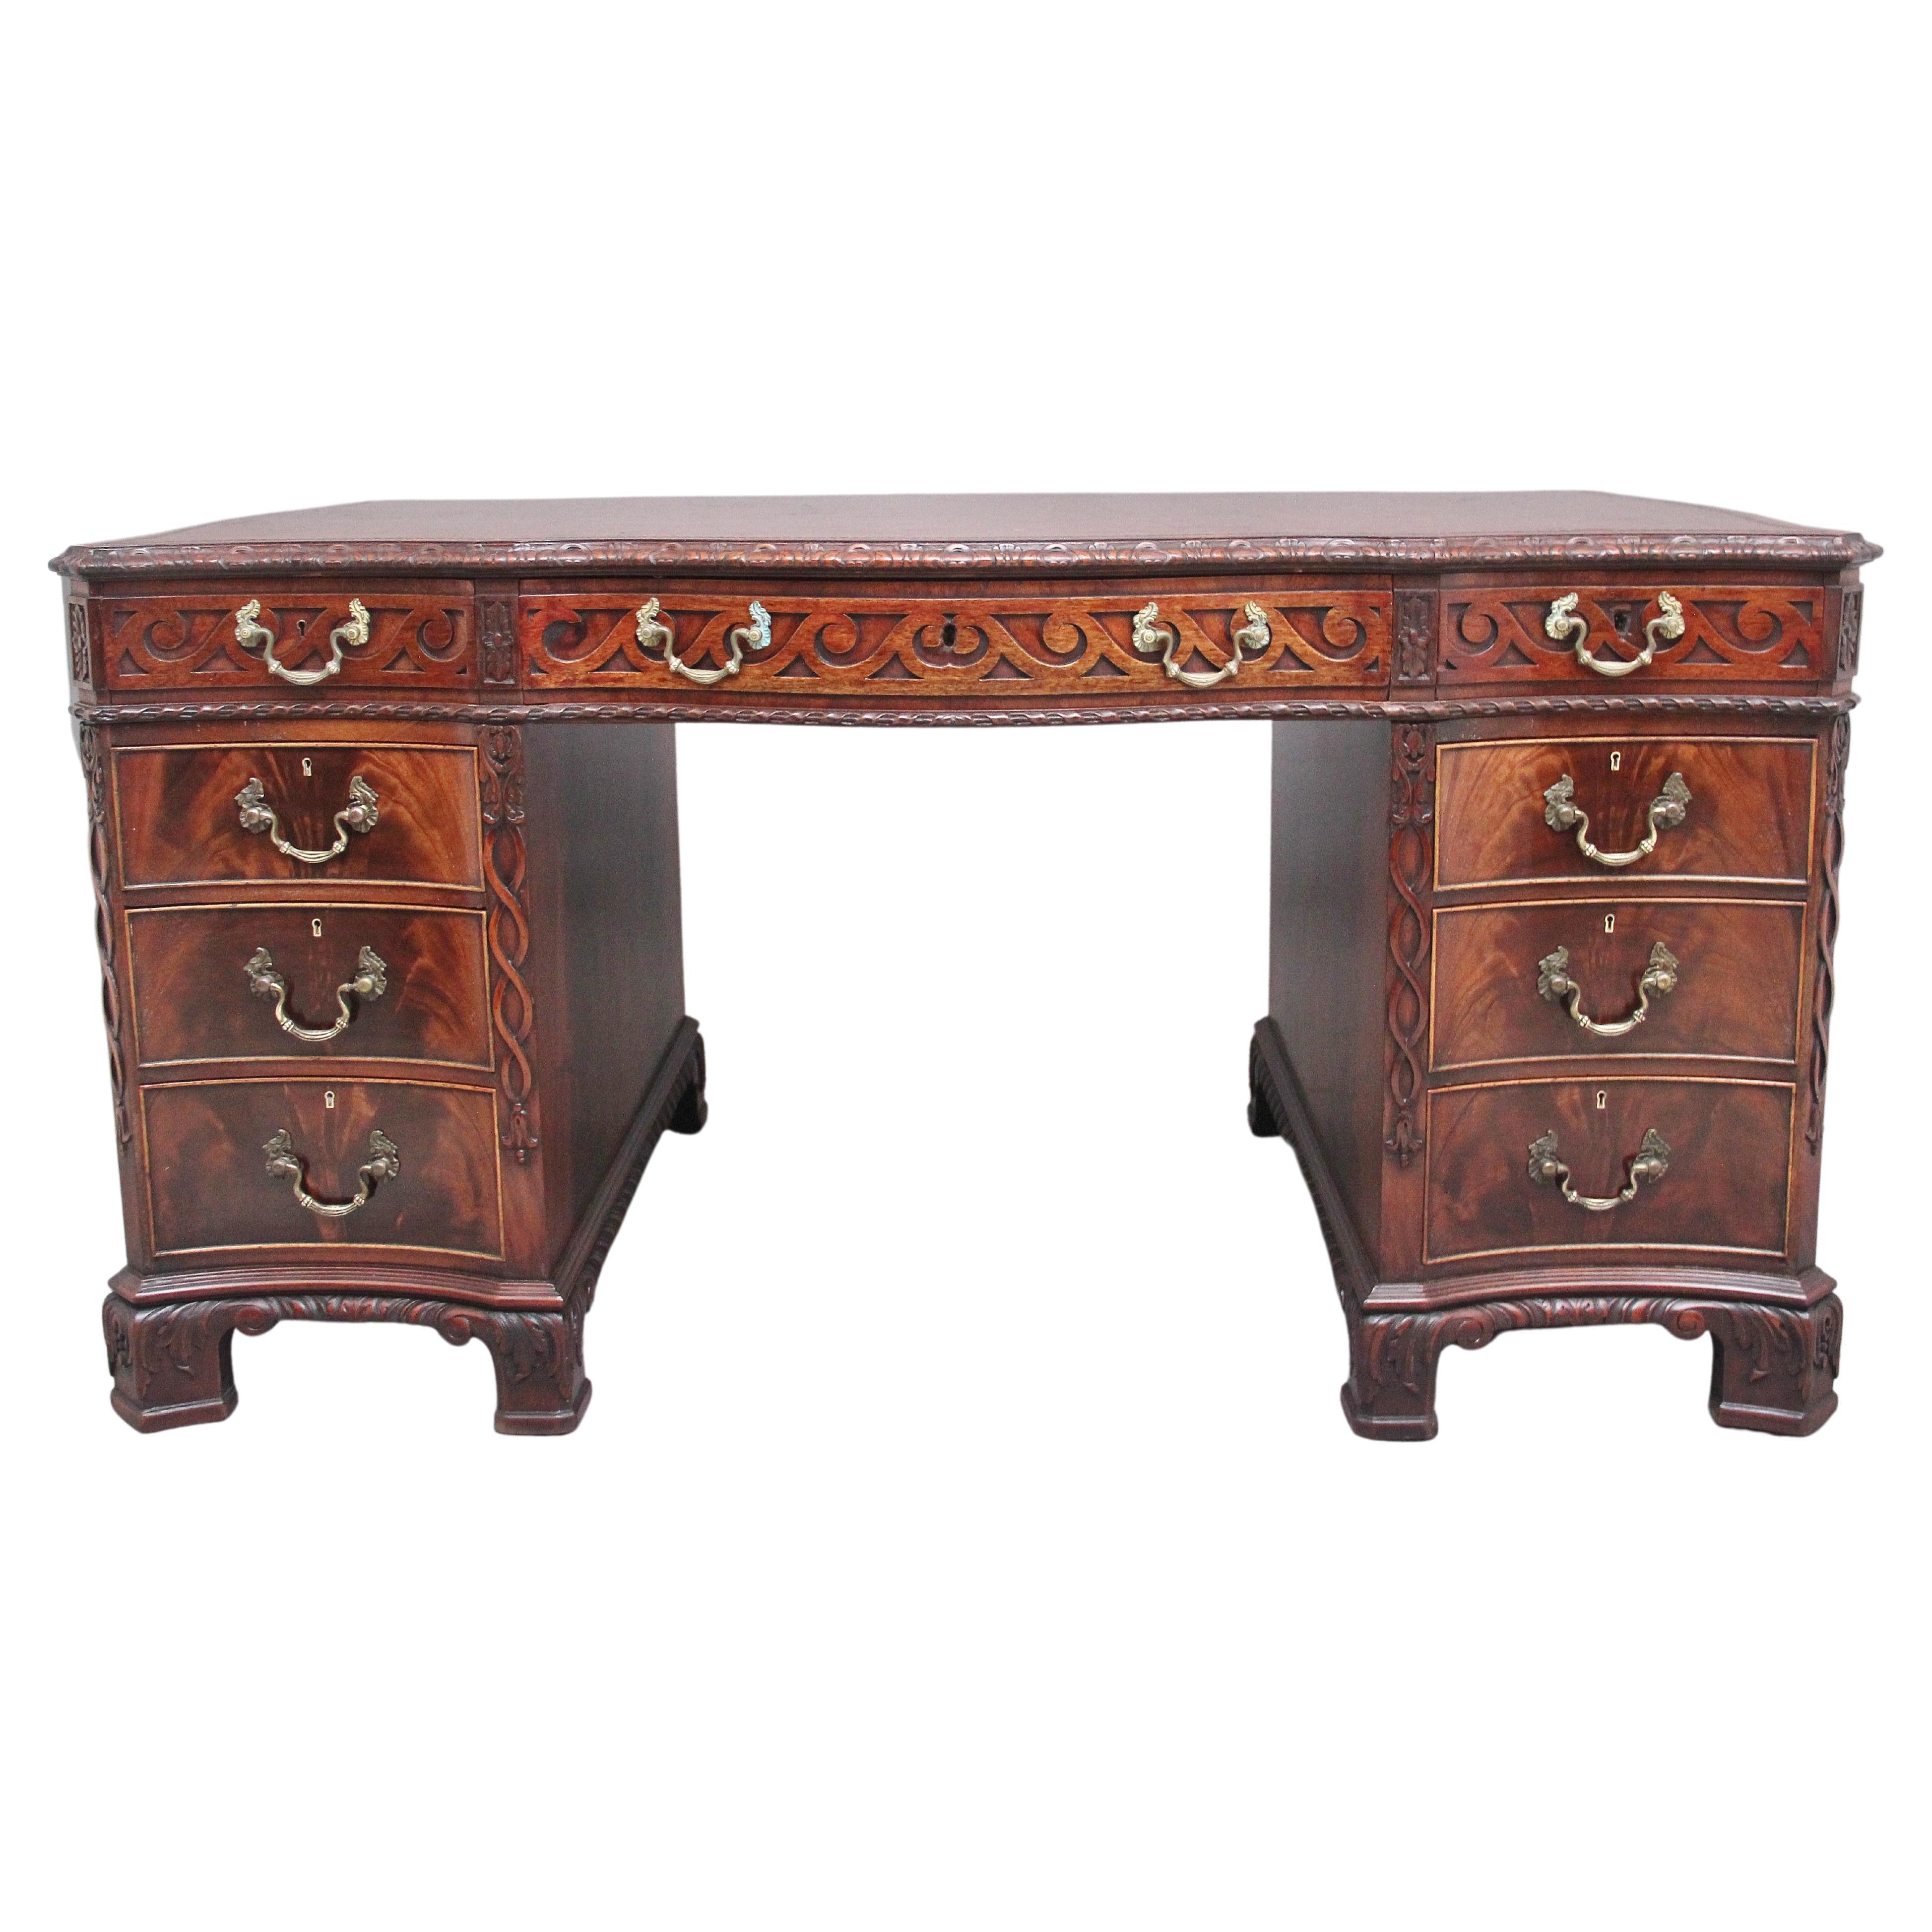 Early 20th Century Mahogany Desk in the Chippendale Style